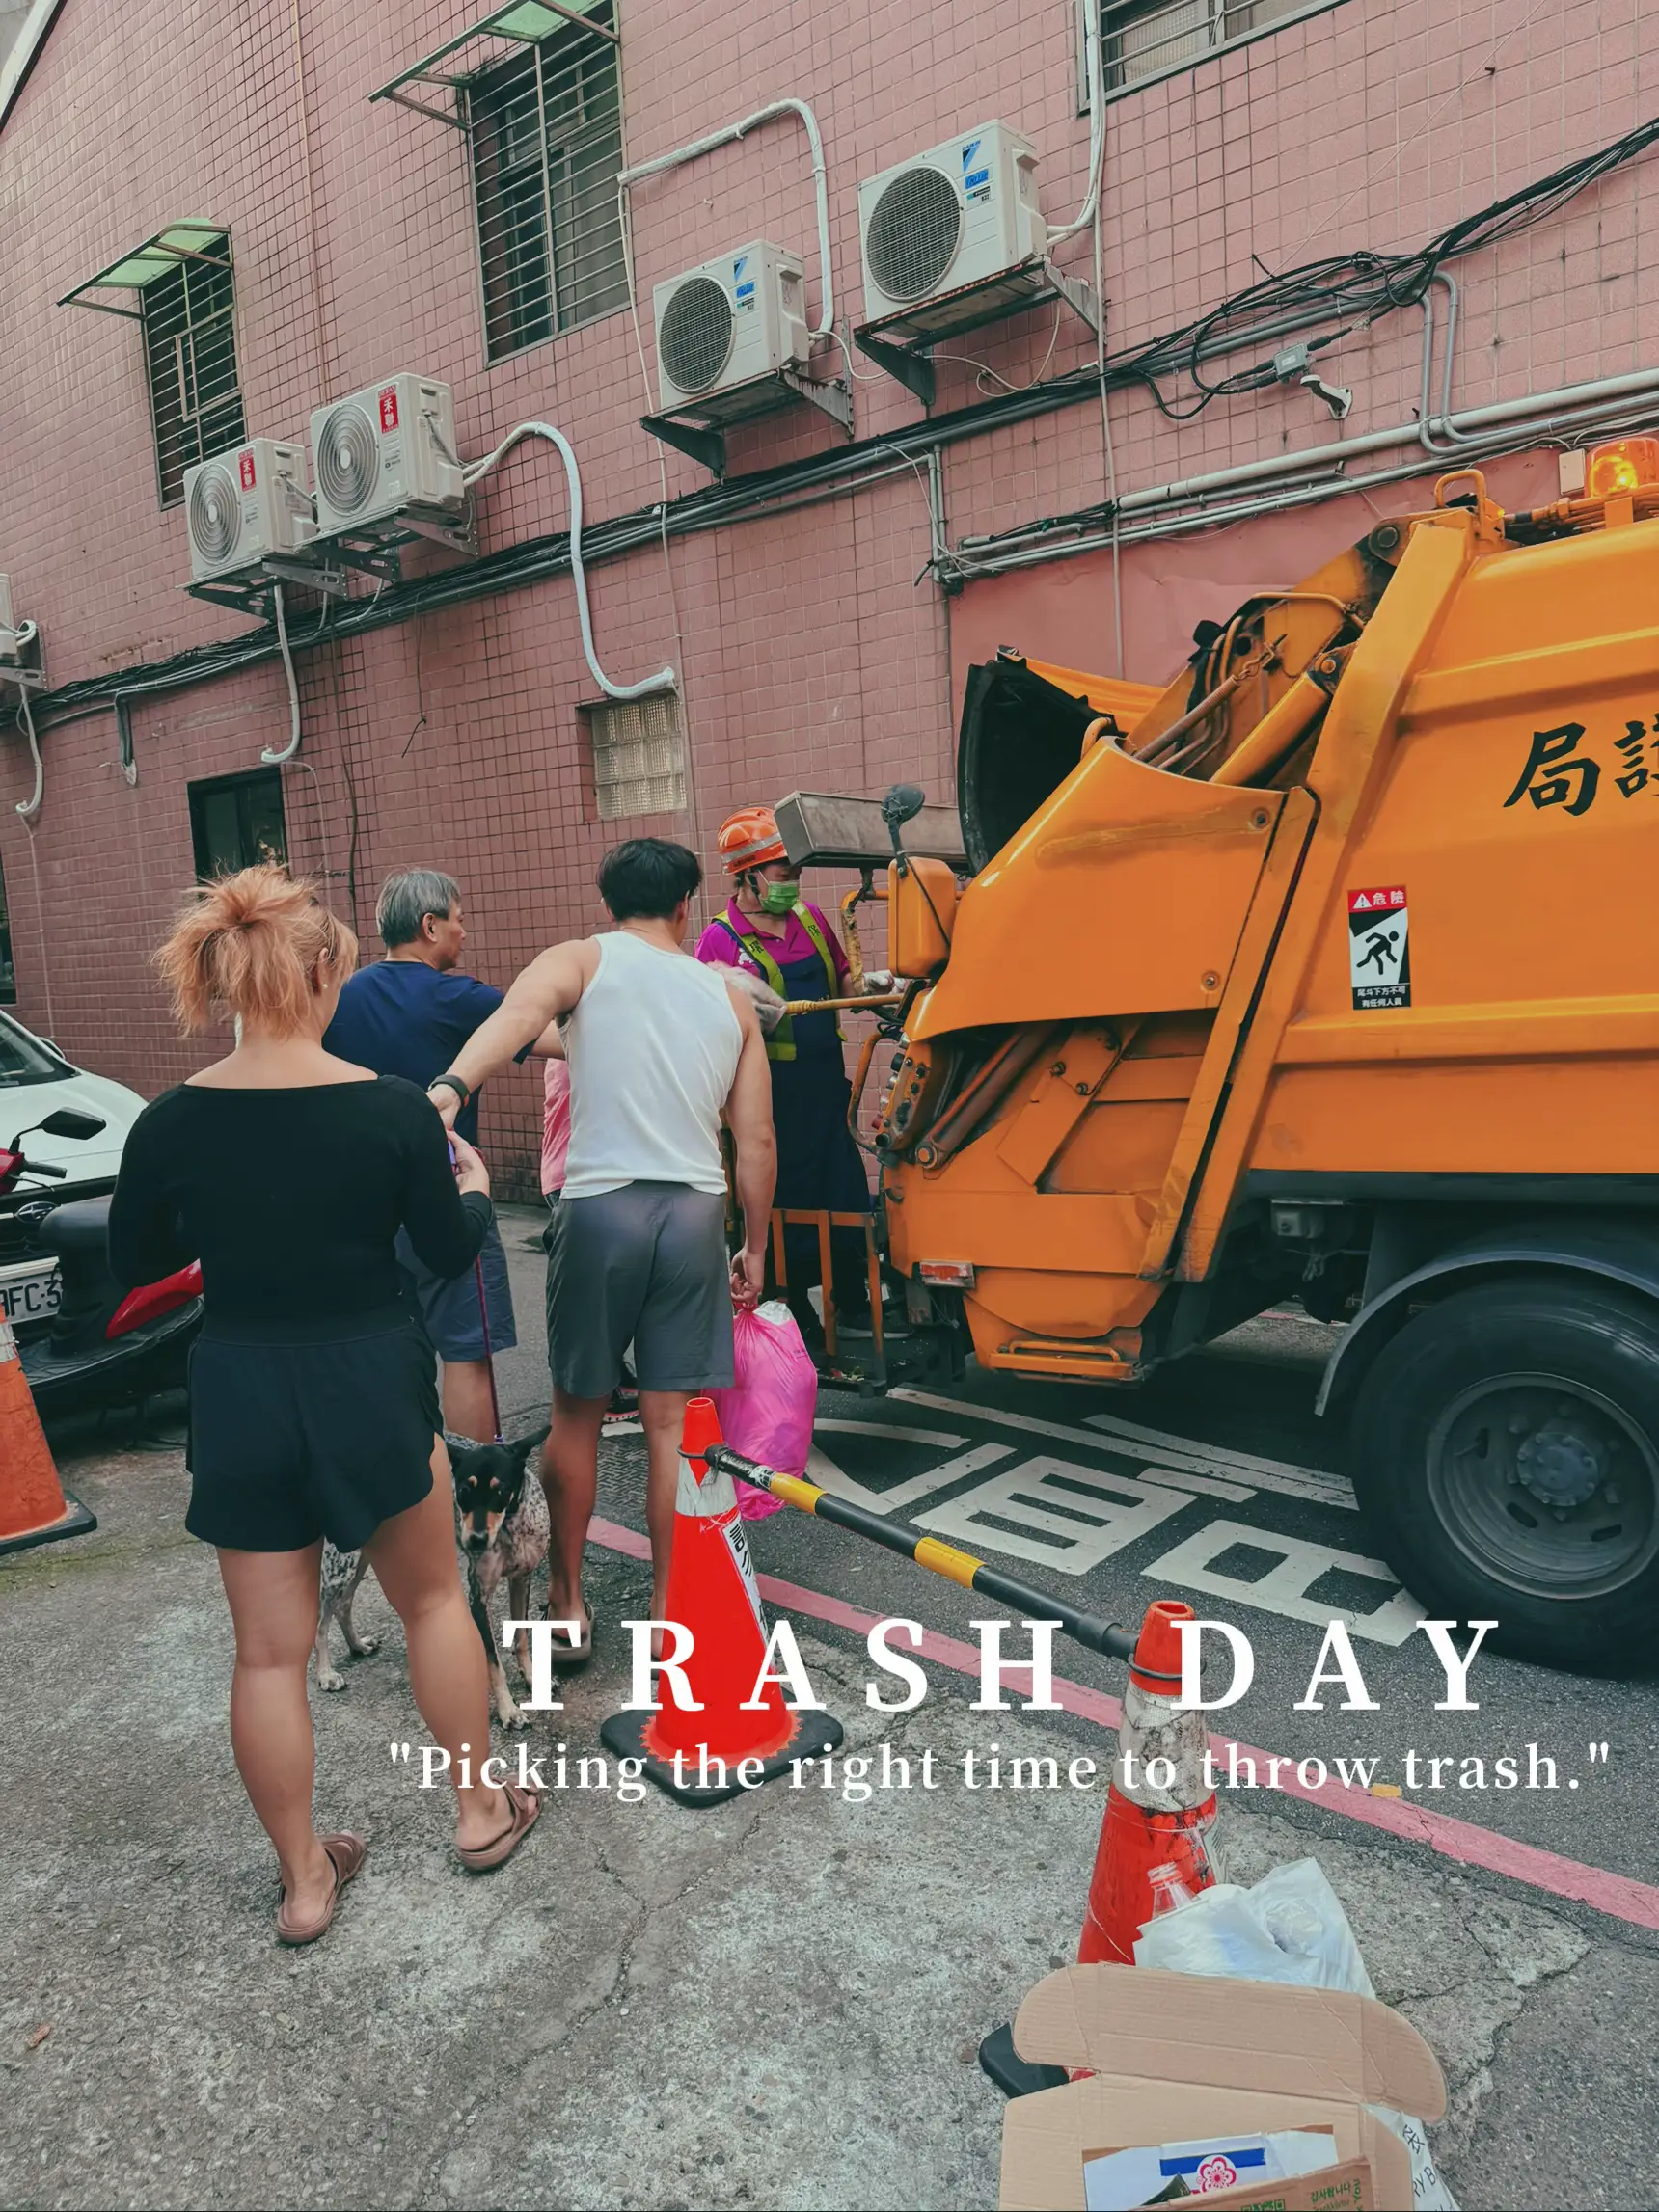 Catch the right time to throw Trash!'s images